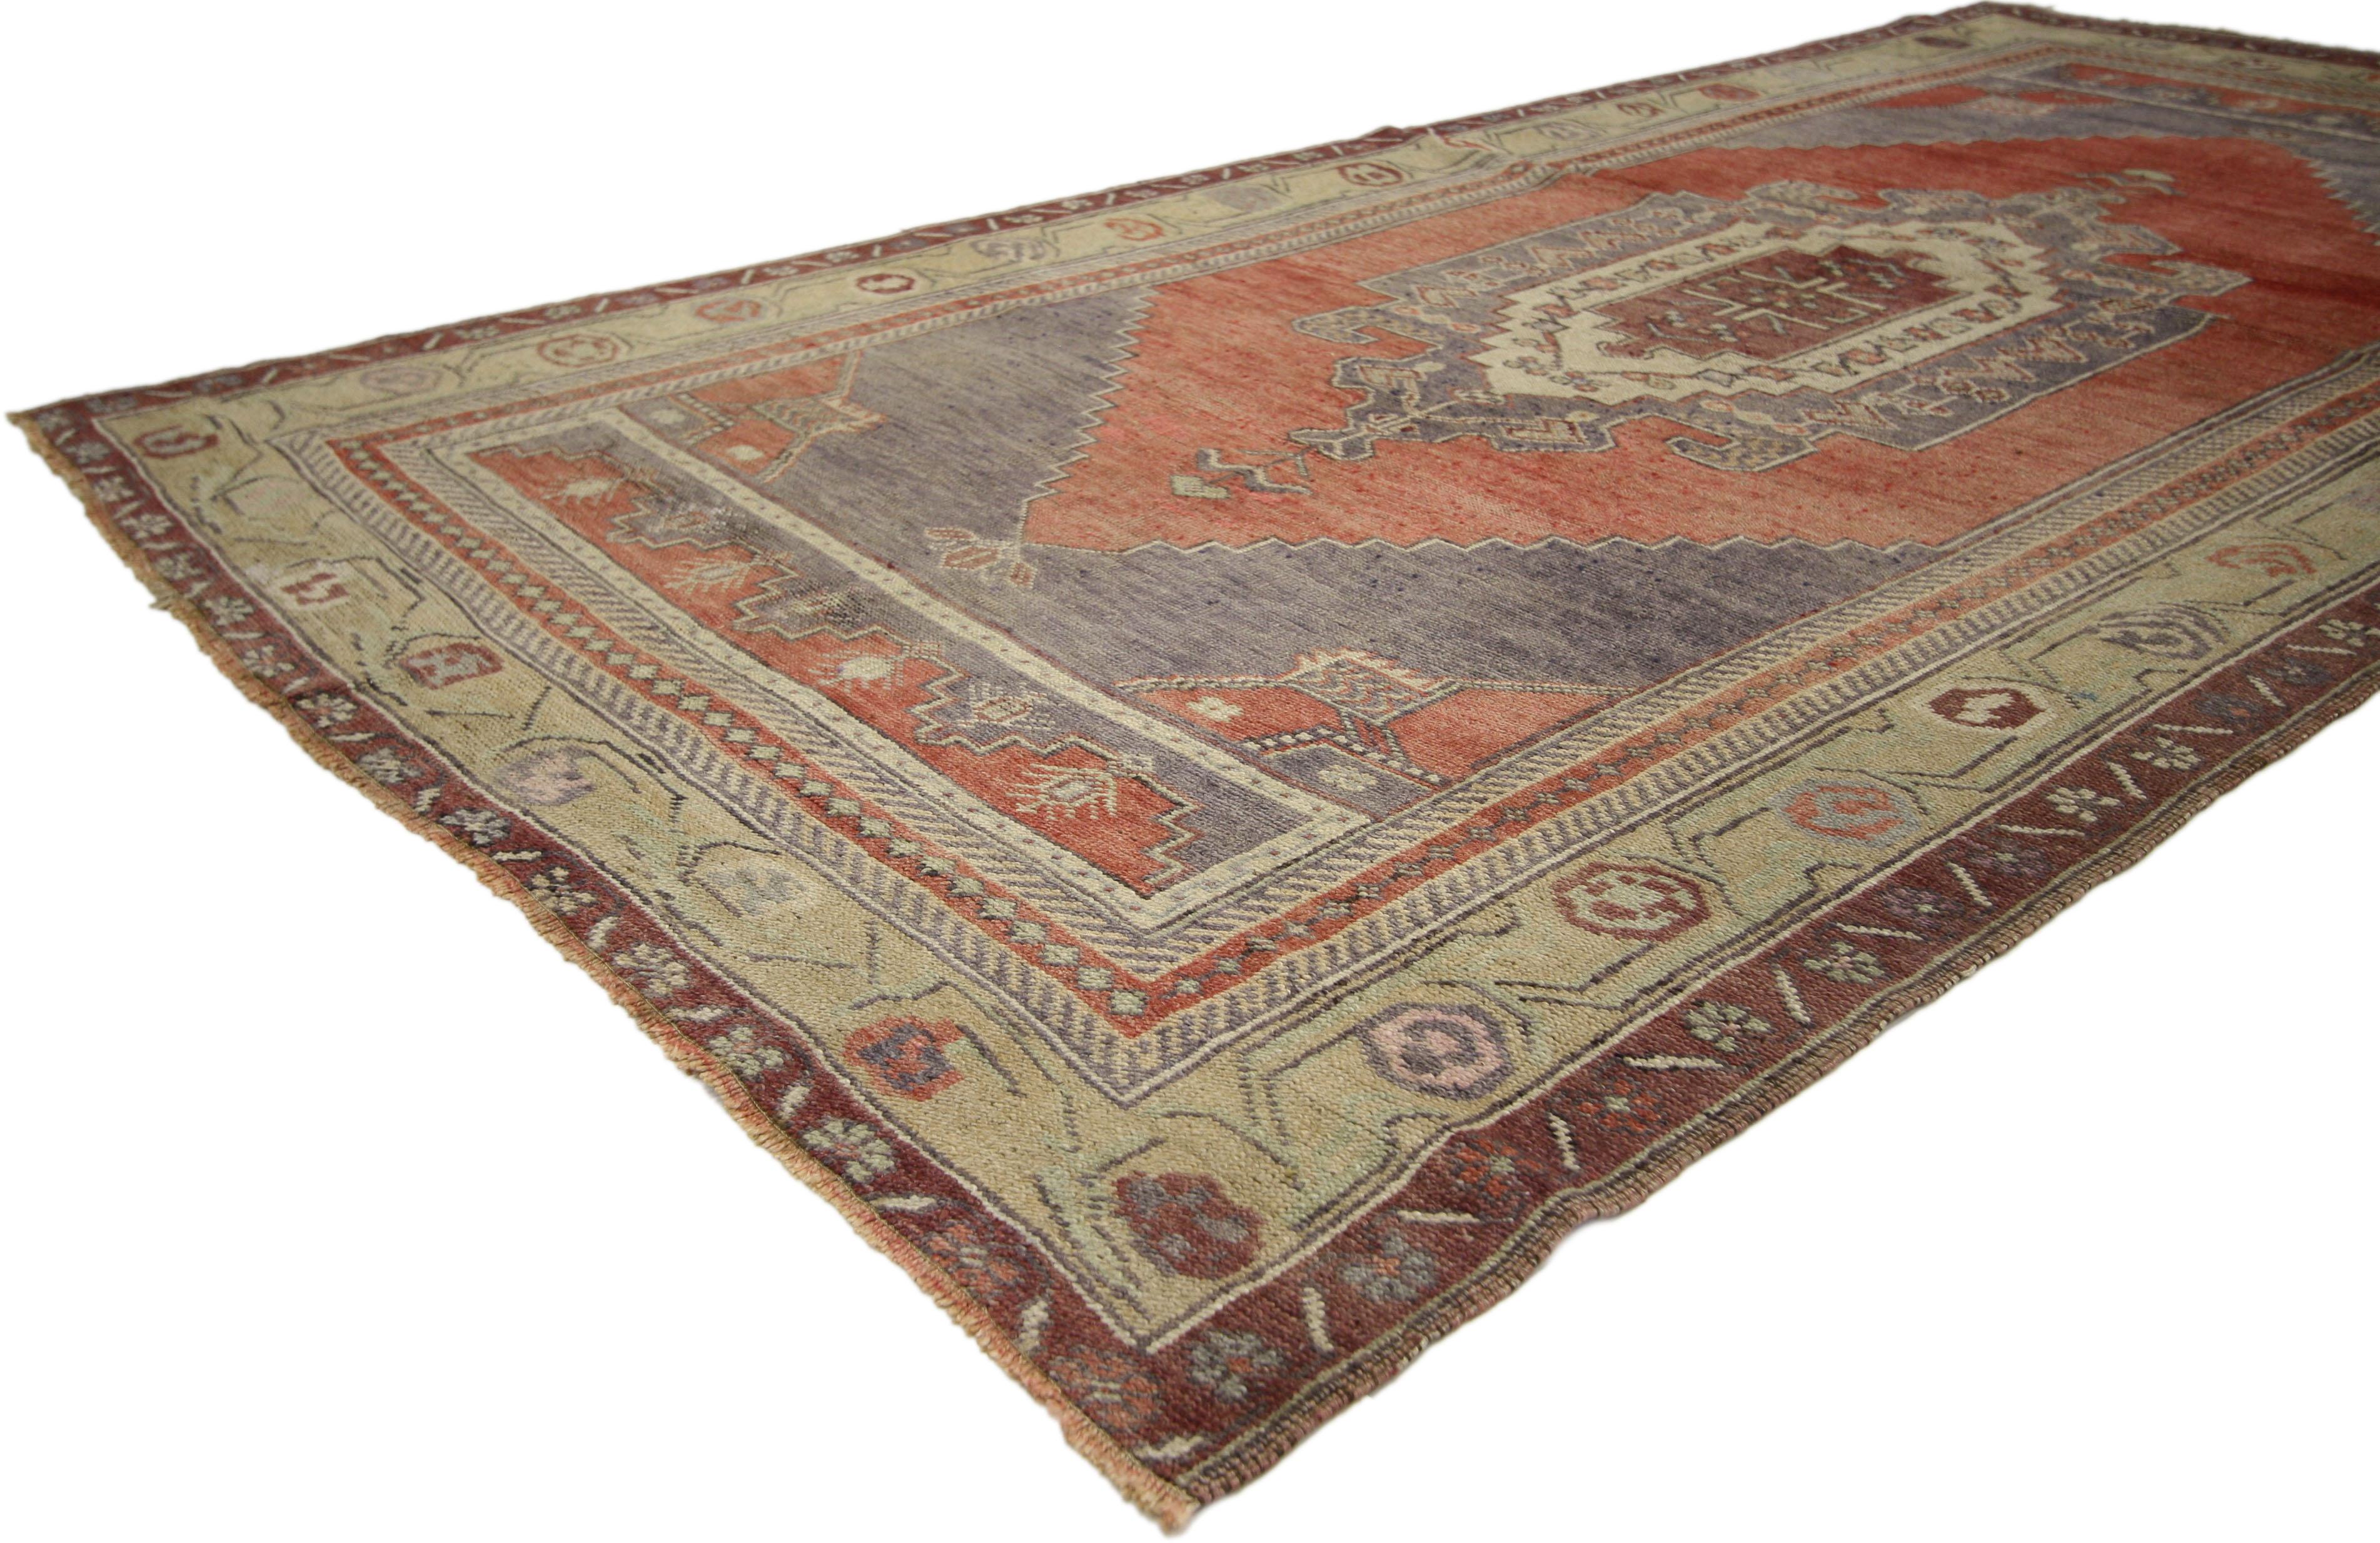 Vintage Turkish Oushak Gallery Rug with Tribal Pattern, Wide Hallway Runner In Good Condition For Sale In Dallas, TX